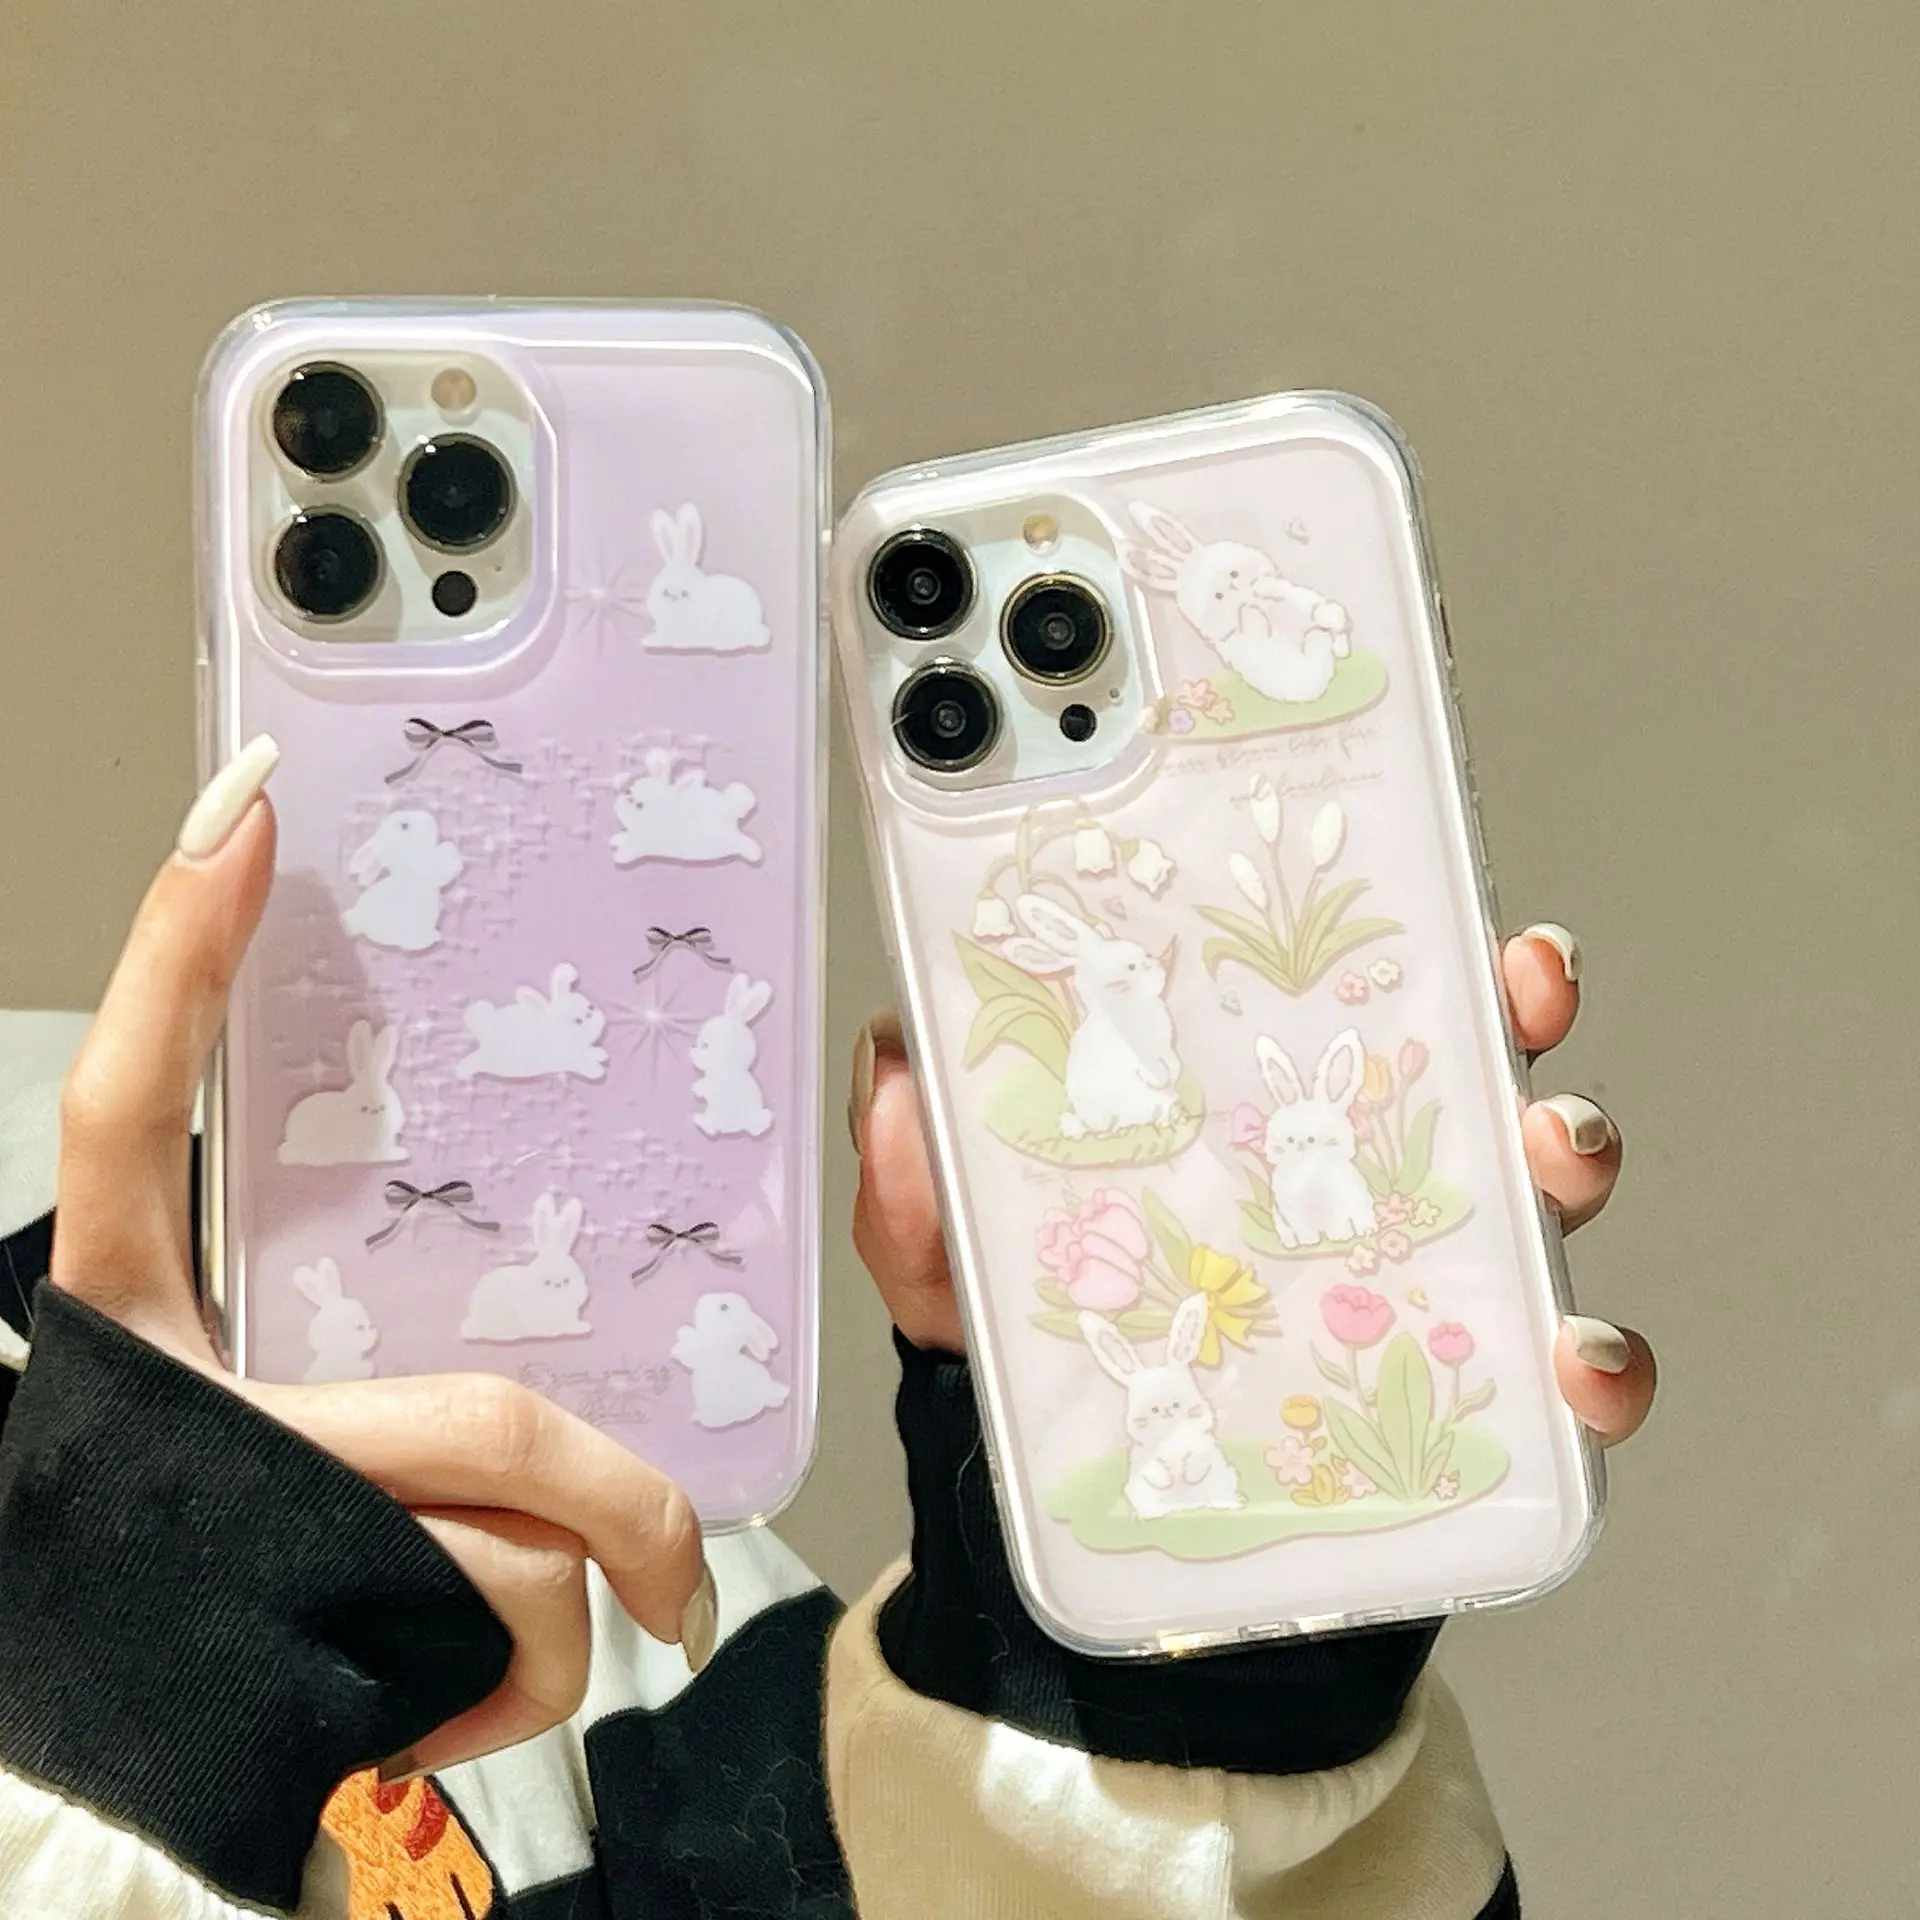 

Pollen Purple Grass Bunny Rabbit Phone Case For iphone 14 13 12 11 Pro Max X XR XSMAX 7 8 Plus SE TPU Case Cover new products